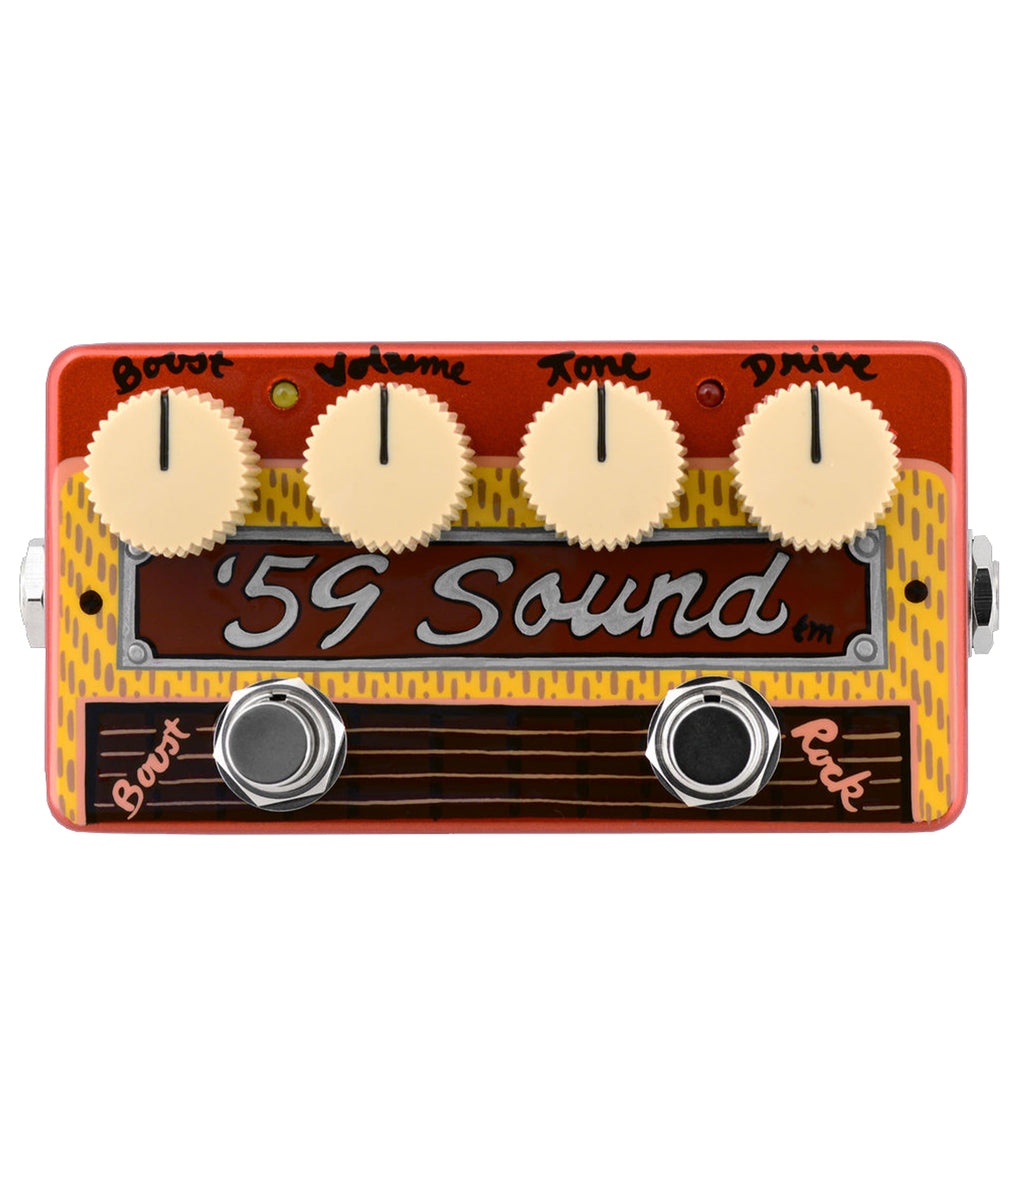 Zvex 59' Sound Hand-Painted Overdrive Pedal - Megatone Music